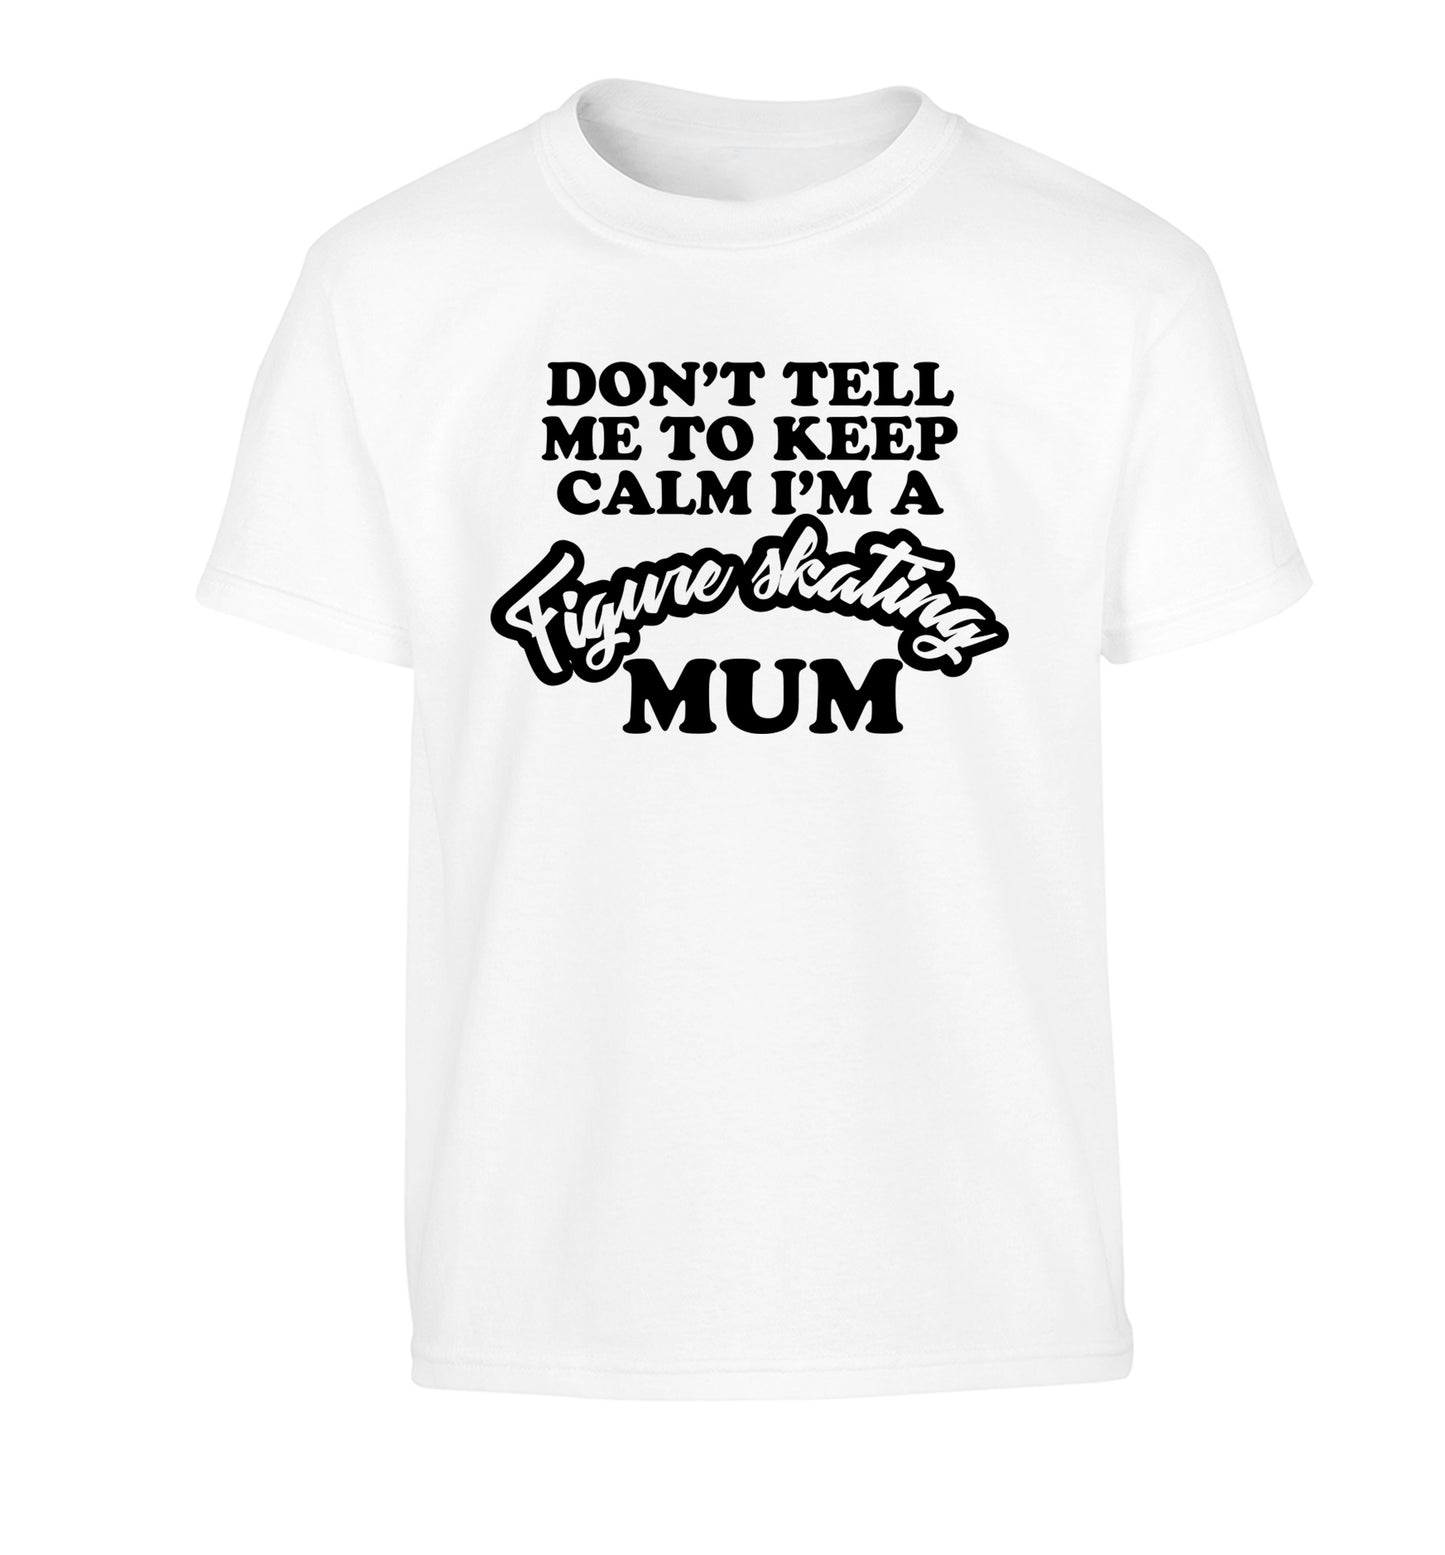 Don't tell me to keep calm I'm a figure skating mum Children's white Tshirt 12-14 Years